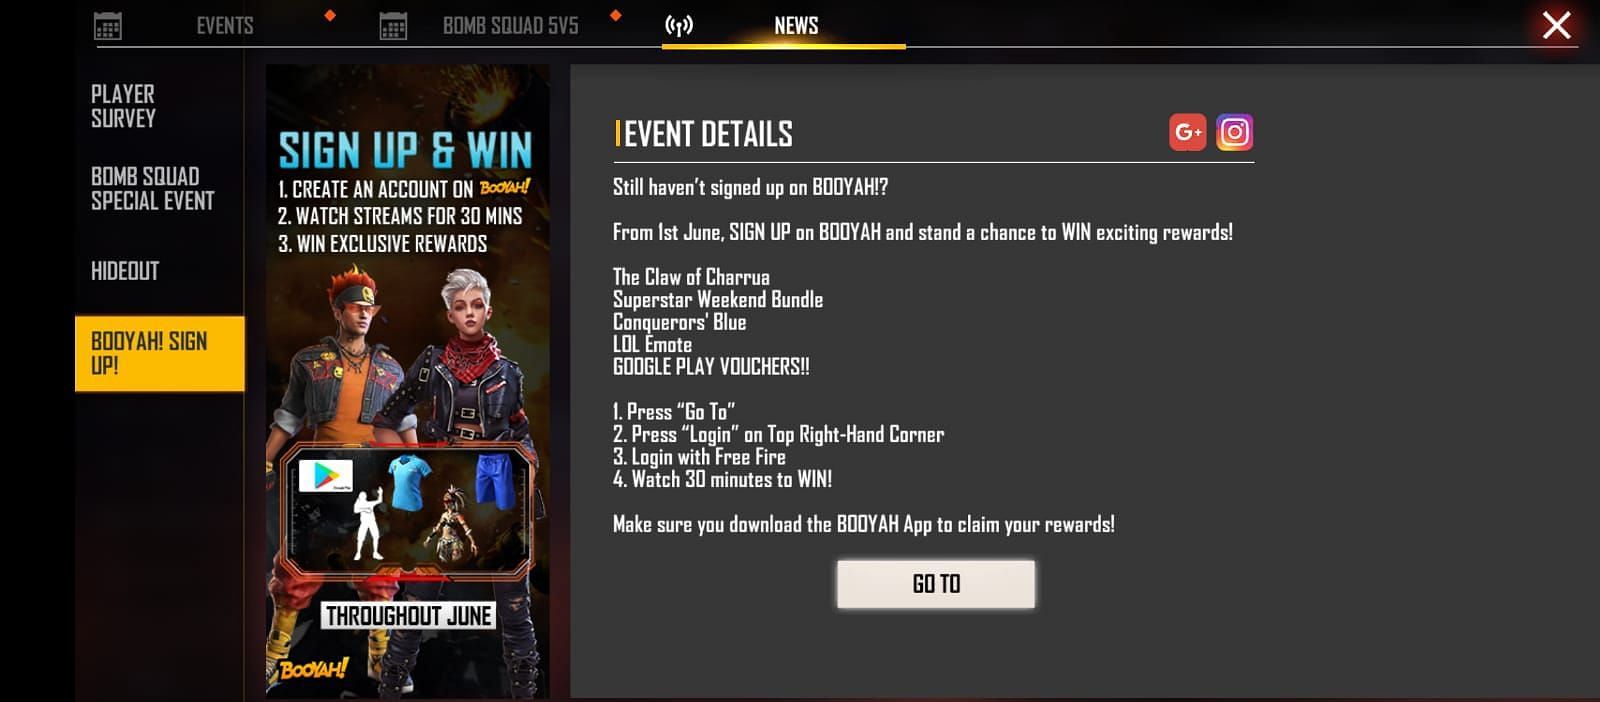 Watch to Win event in Free Fire offers free in-game items to its players (Image via Garena)